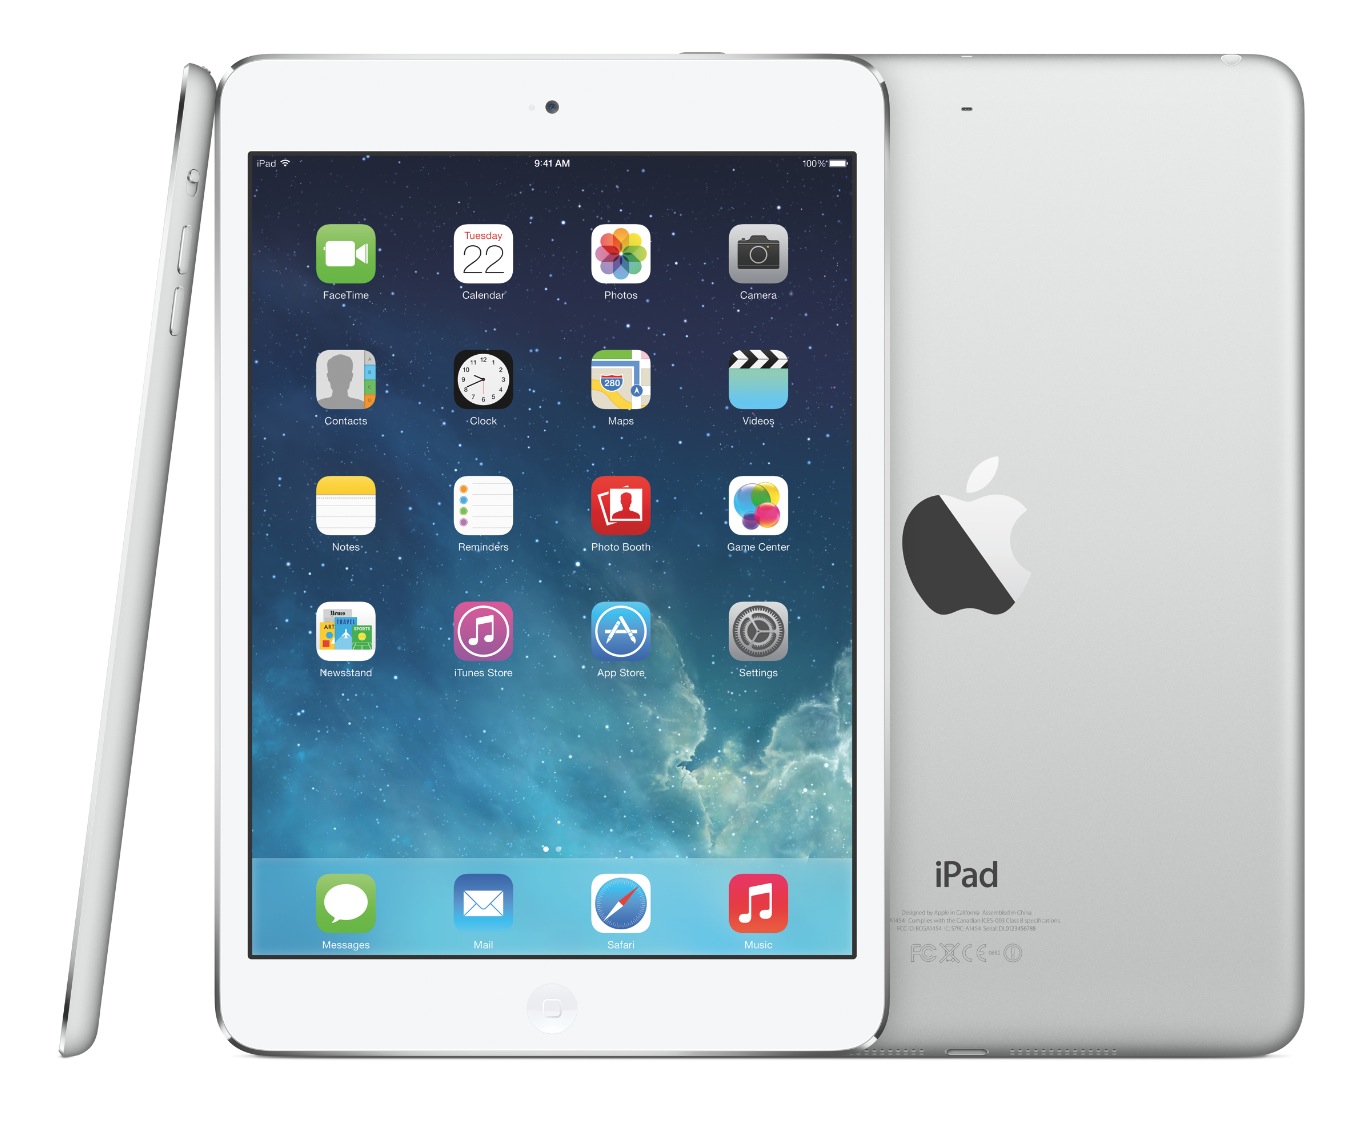 $ 100 discount on the Air iPad until September 4th